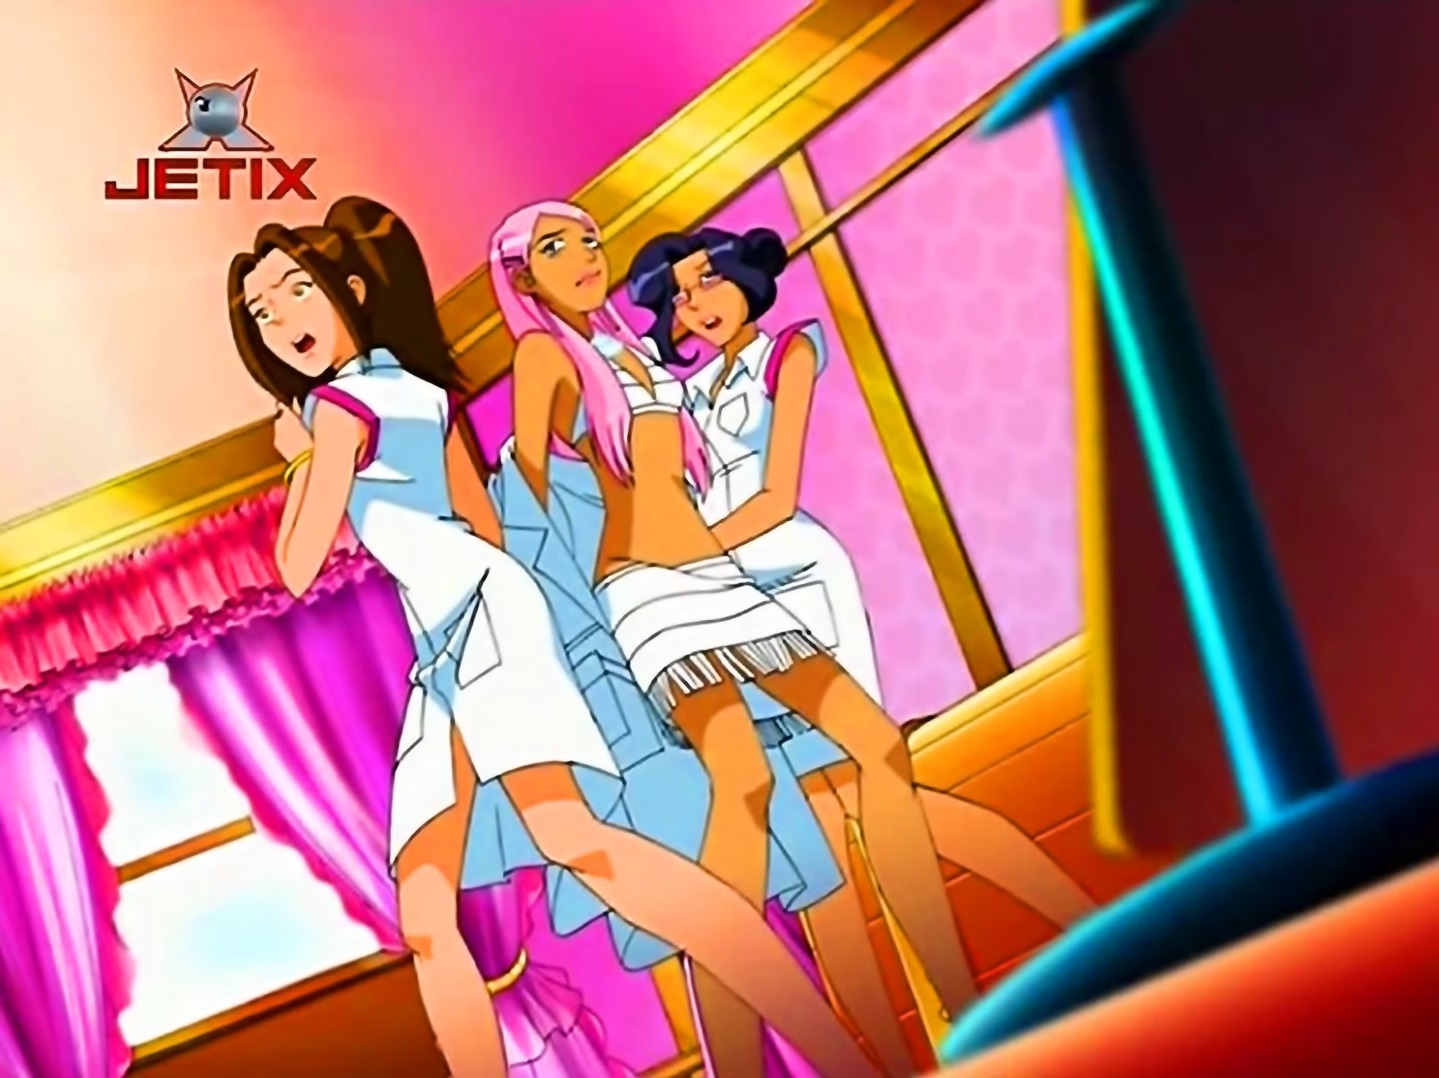 Image Milan2 Totally Spies Wiki Fandom Powered By Wikia 